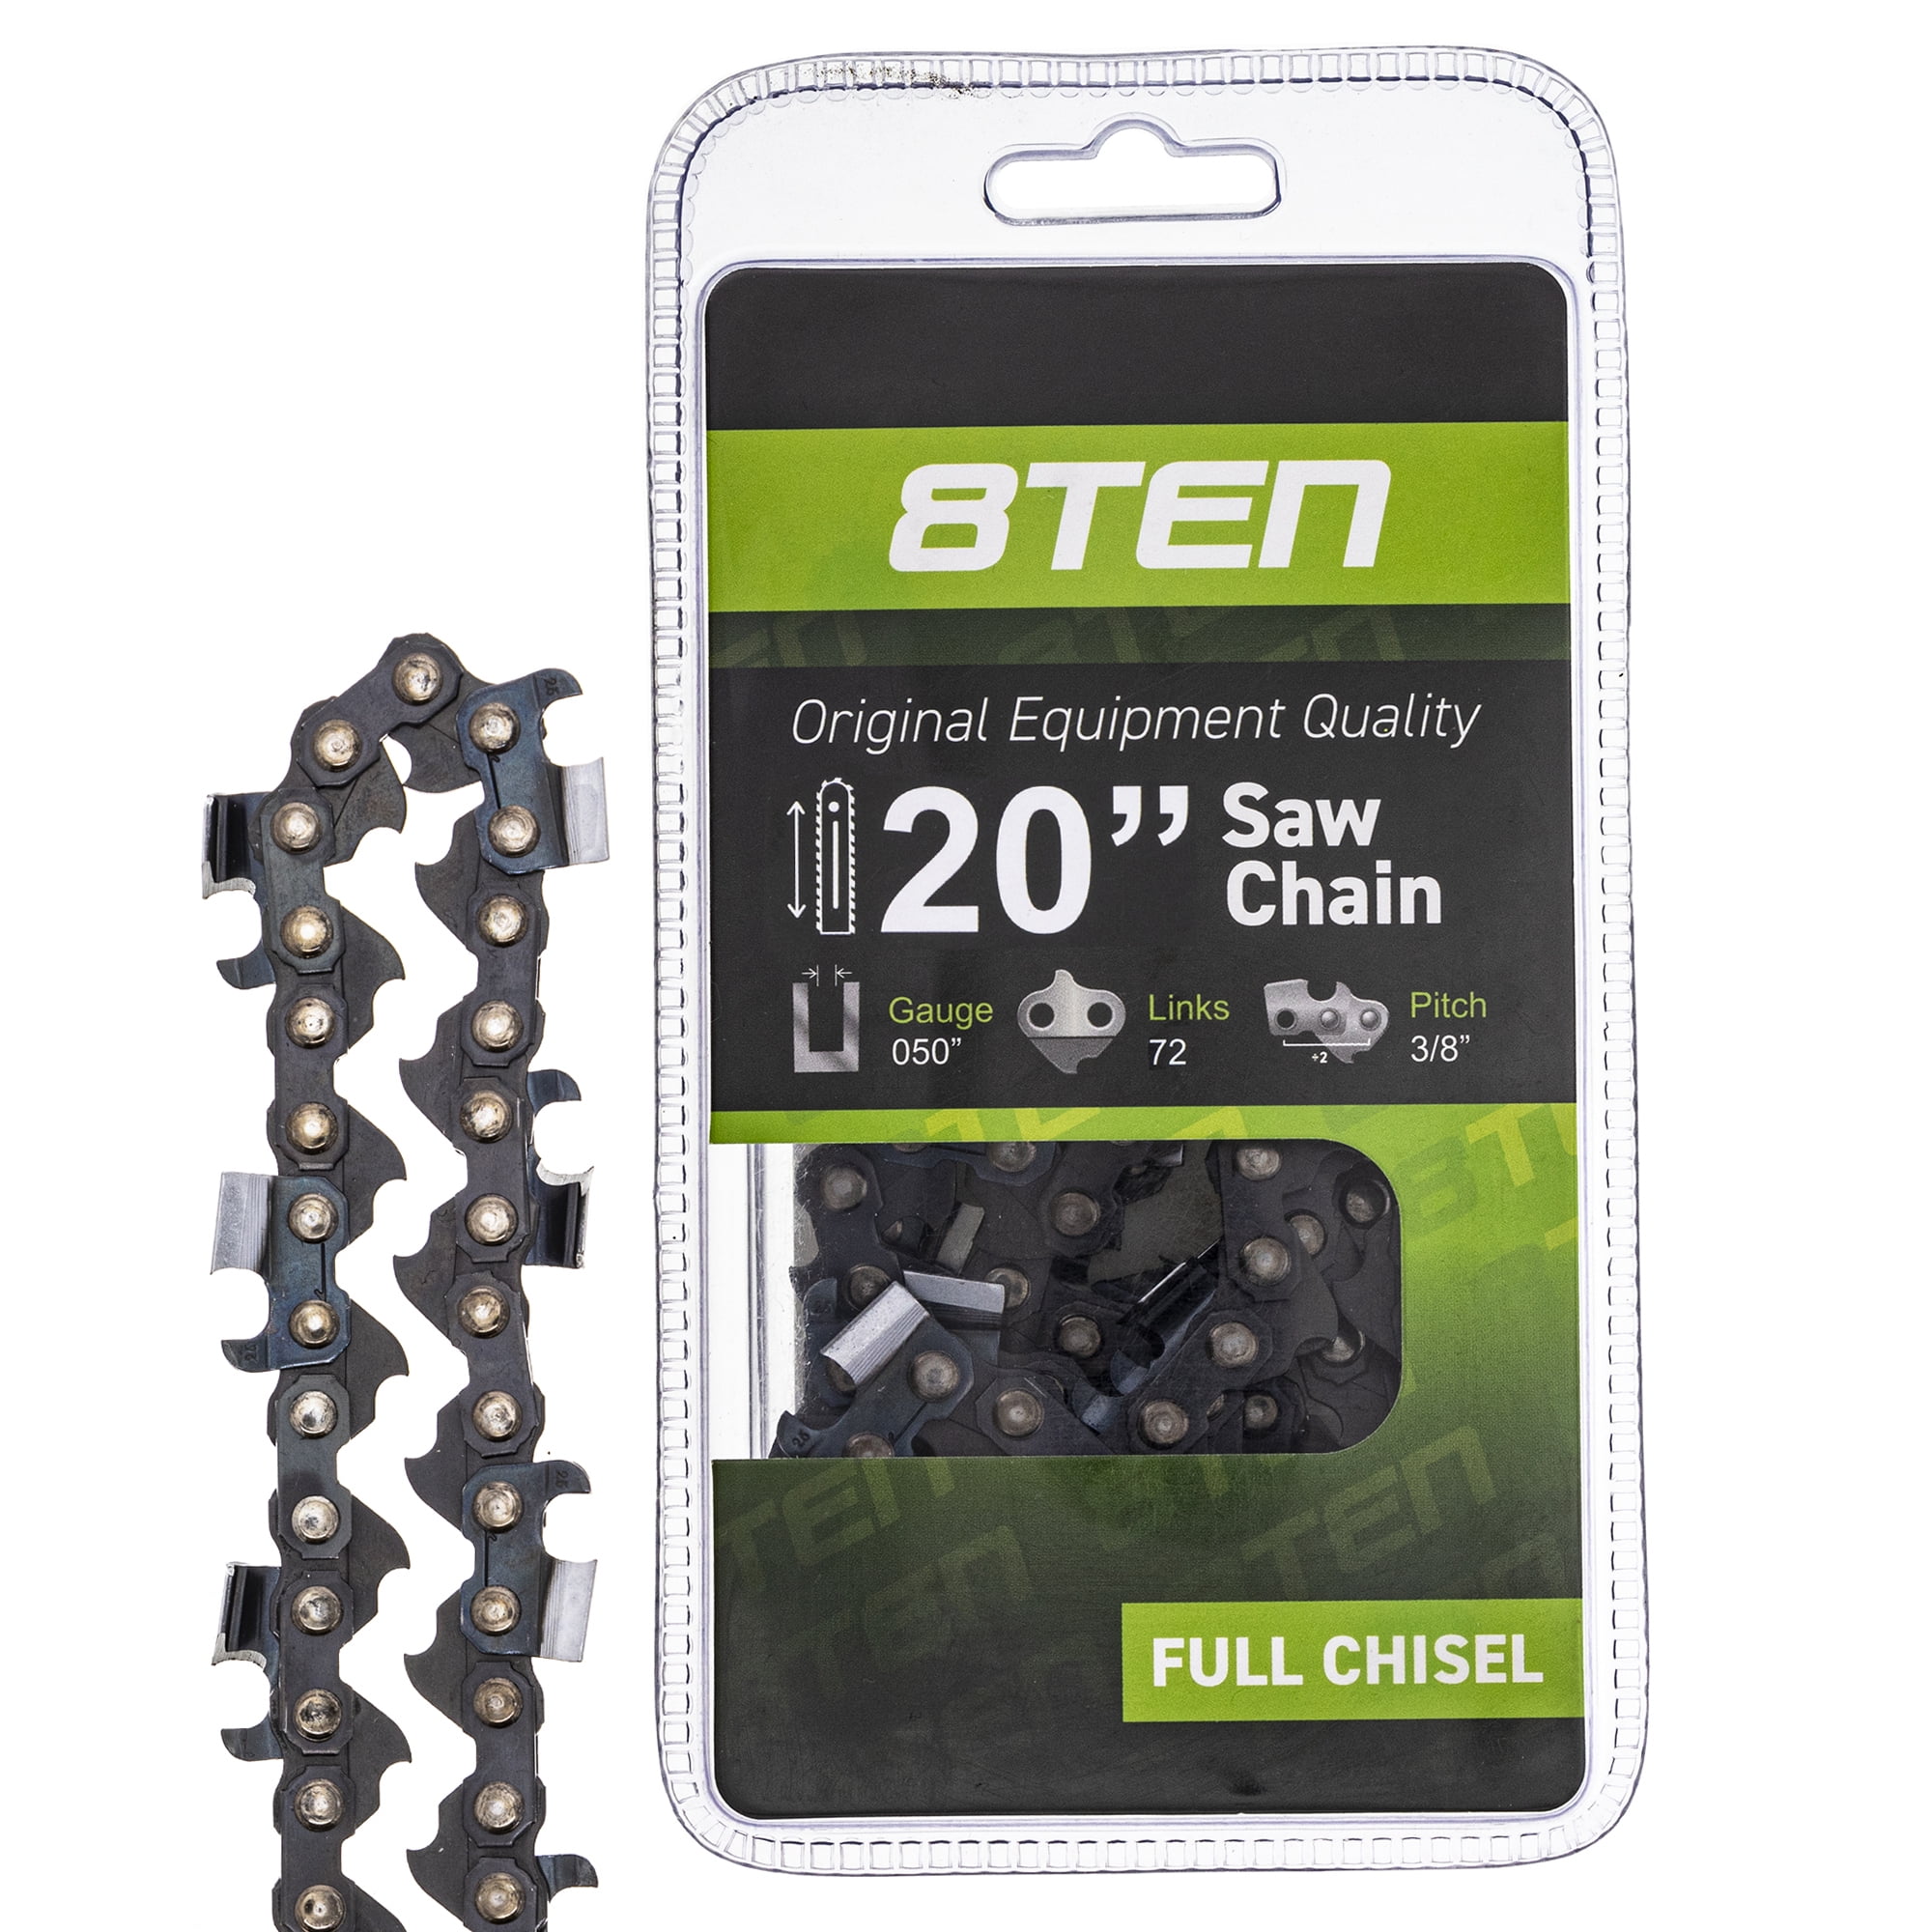 3-Pack 20" Full Chisel Chainsaw Chain for Stihl 029 MS 291-3/8" .050" 72 DL 